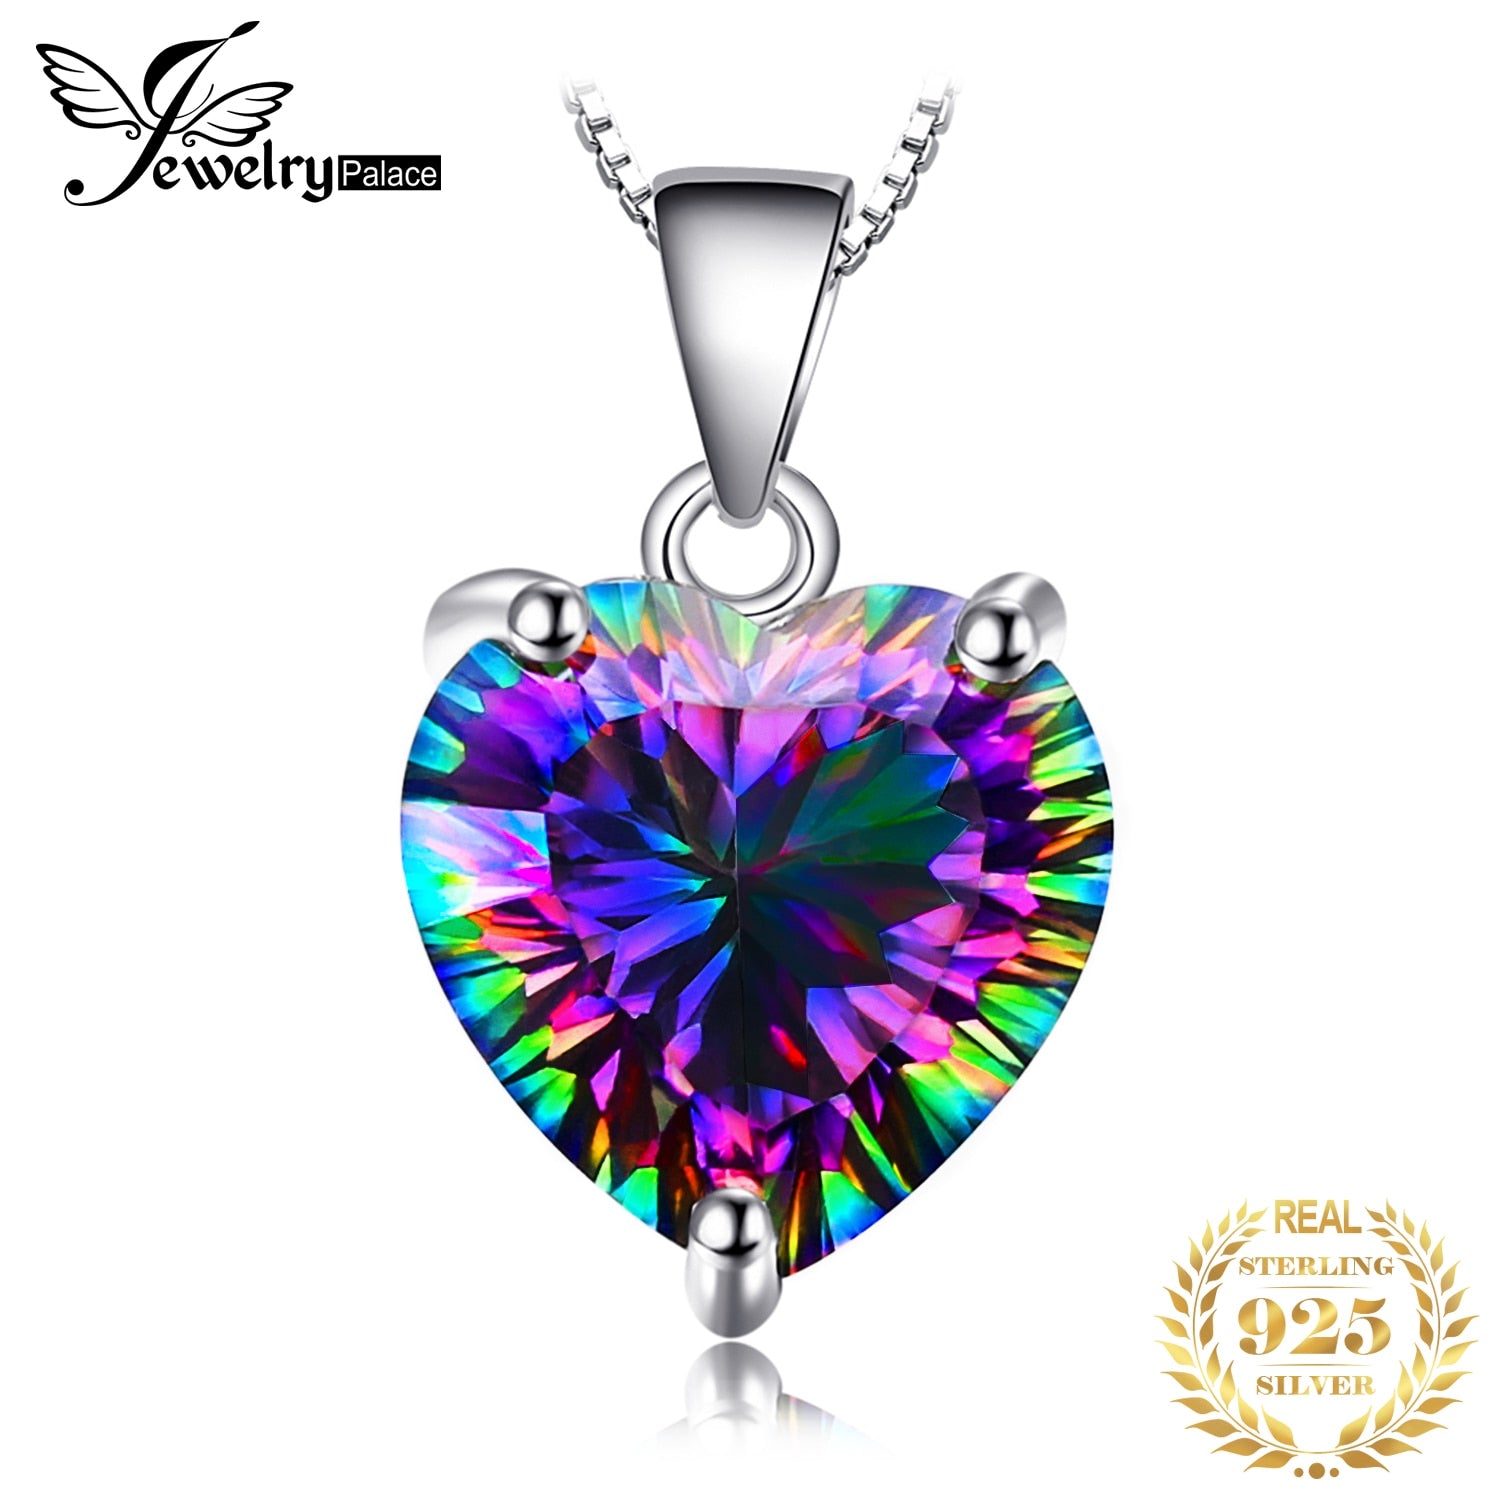 JewelryPalace Heart Natural Rainbow Fire Mystic Quartz 925 Sterling Silver Pendant Necklace for Women Gemstone Choker No Chain Default Title